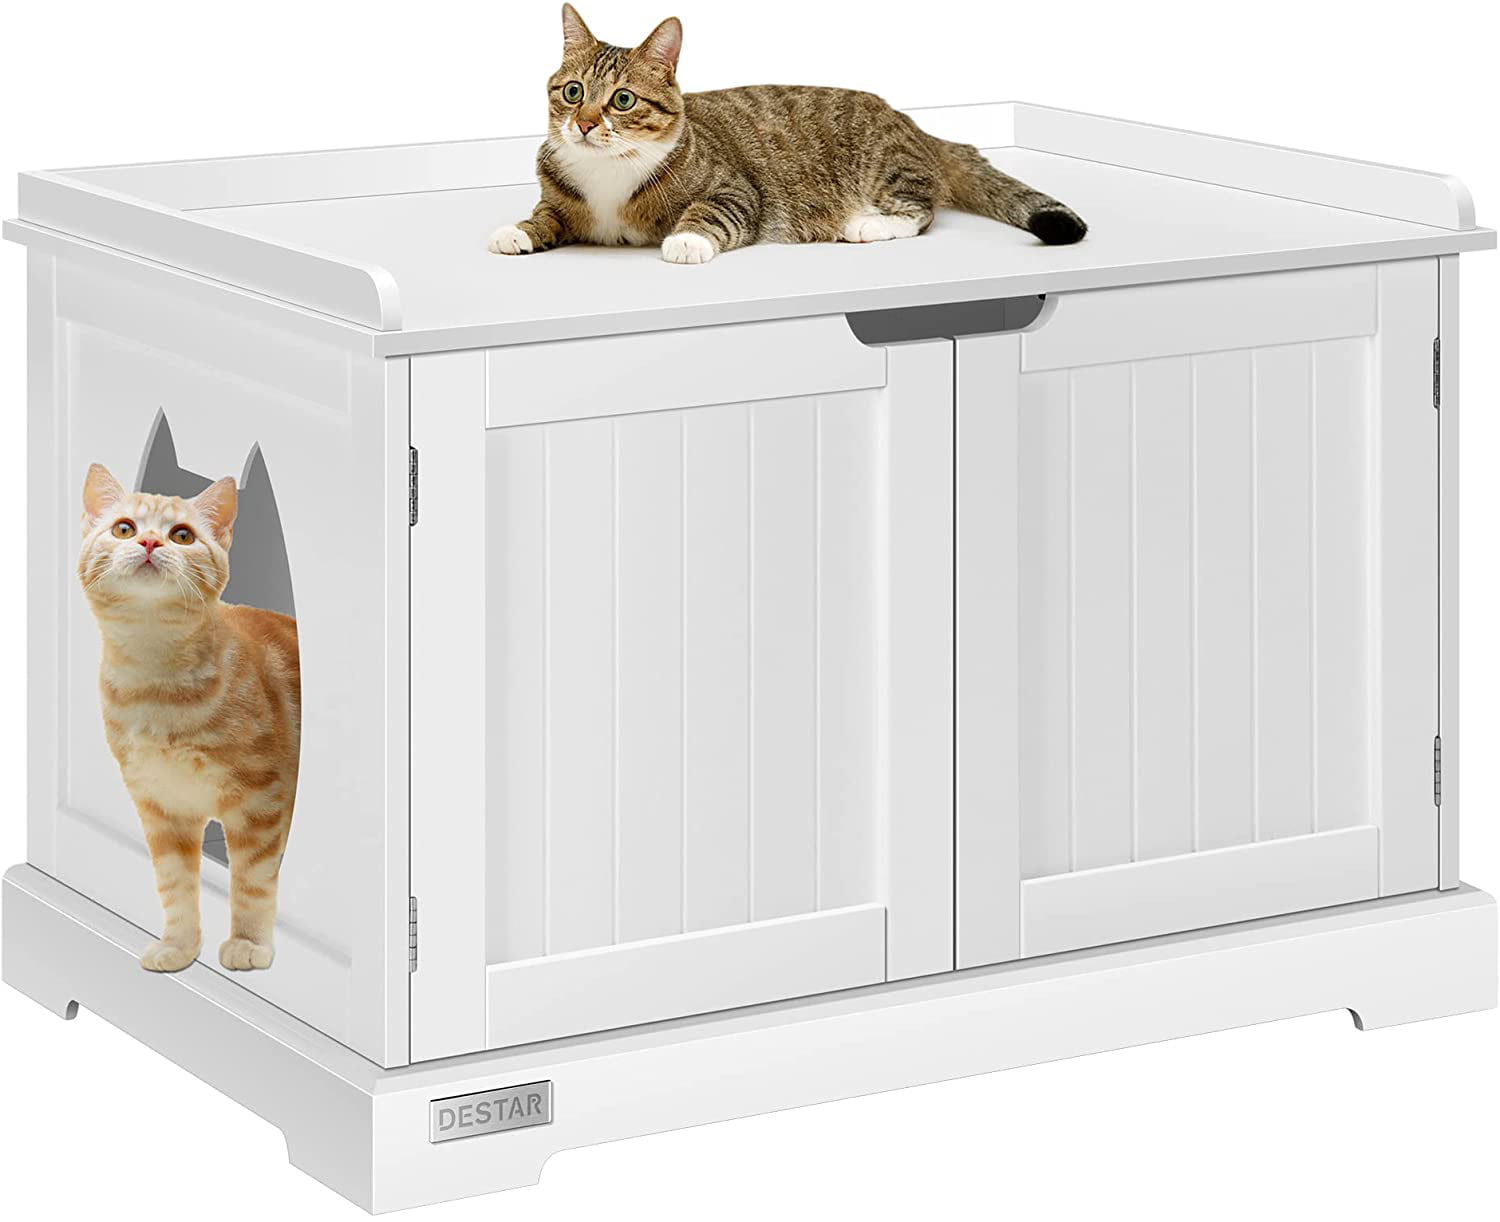 Cat Litter Box Multifunctional Hidden Cat Litter Box Cat Tray Pet House Easy to Assemble and Clean Suitable for Small Spaces,Brown 